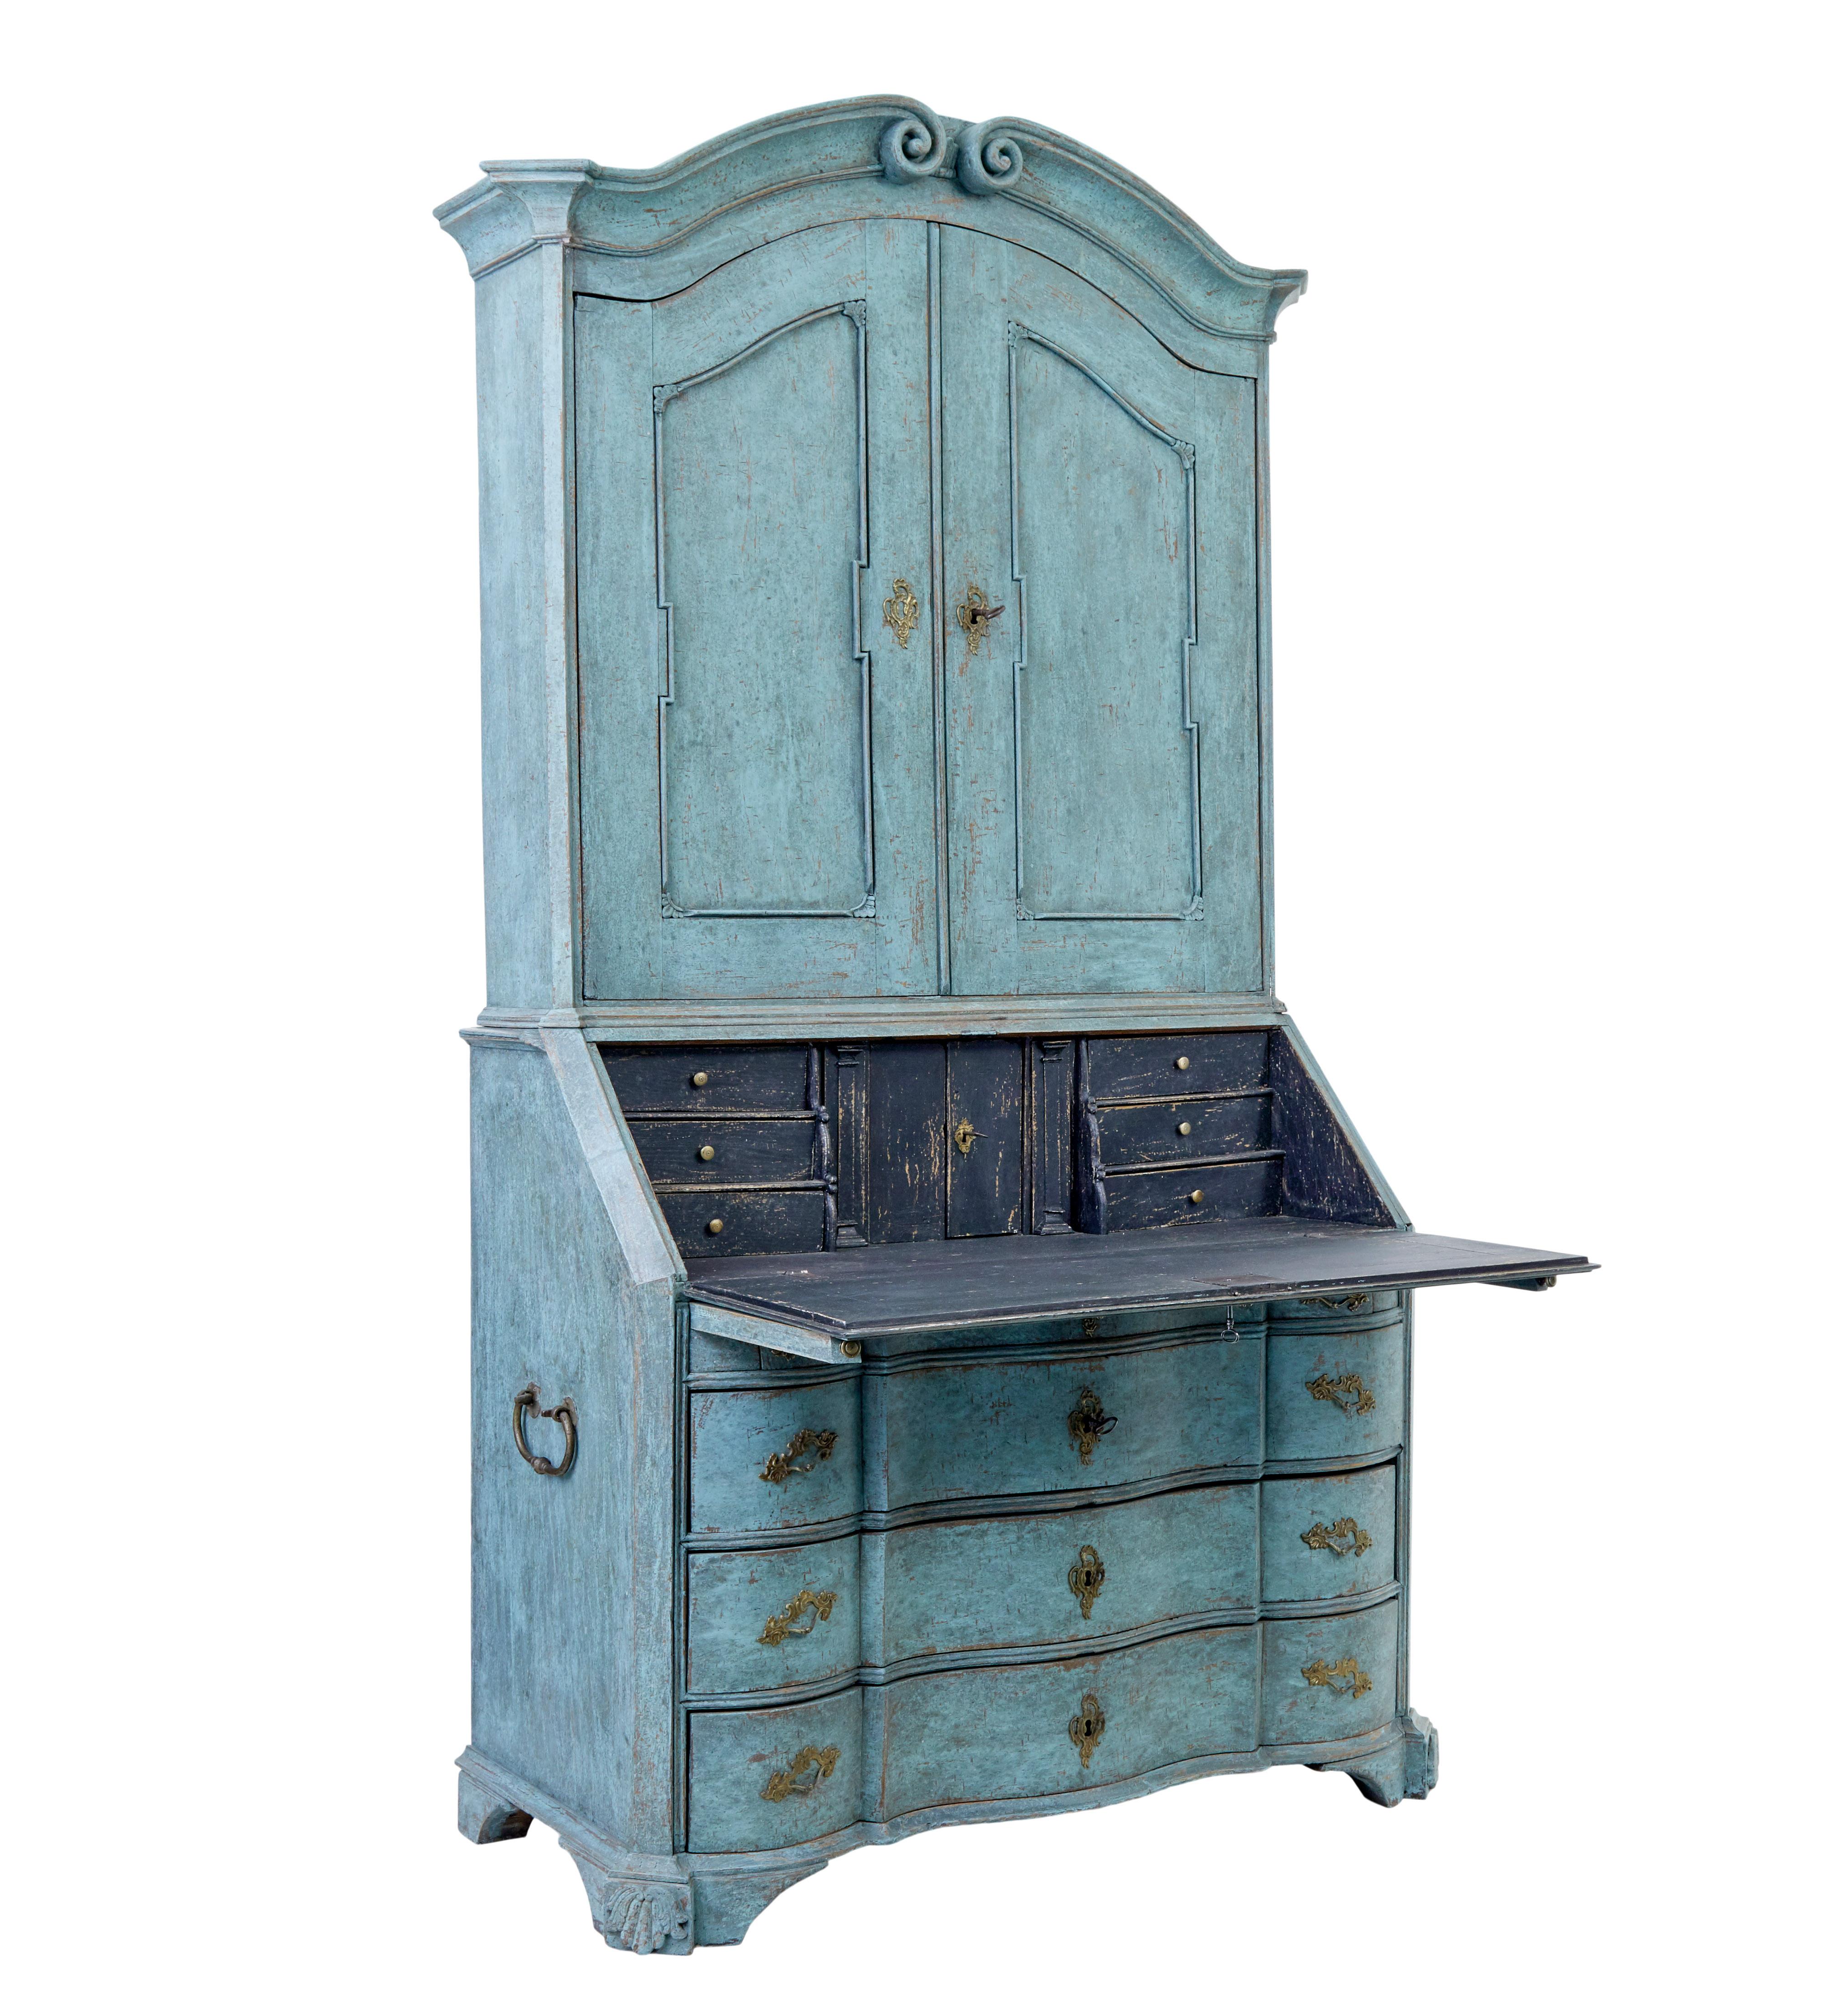 Stunning baroque Swedish painted bureau bookcase circa 1780.

Comprising of 2 parts.  Top section with a beautiful deep scrolling cornice, below which the double doors open to 3 shelves.  Bottom section with moulded bureau front, fall opens to